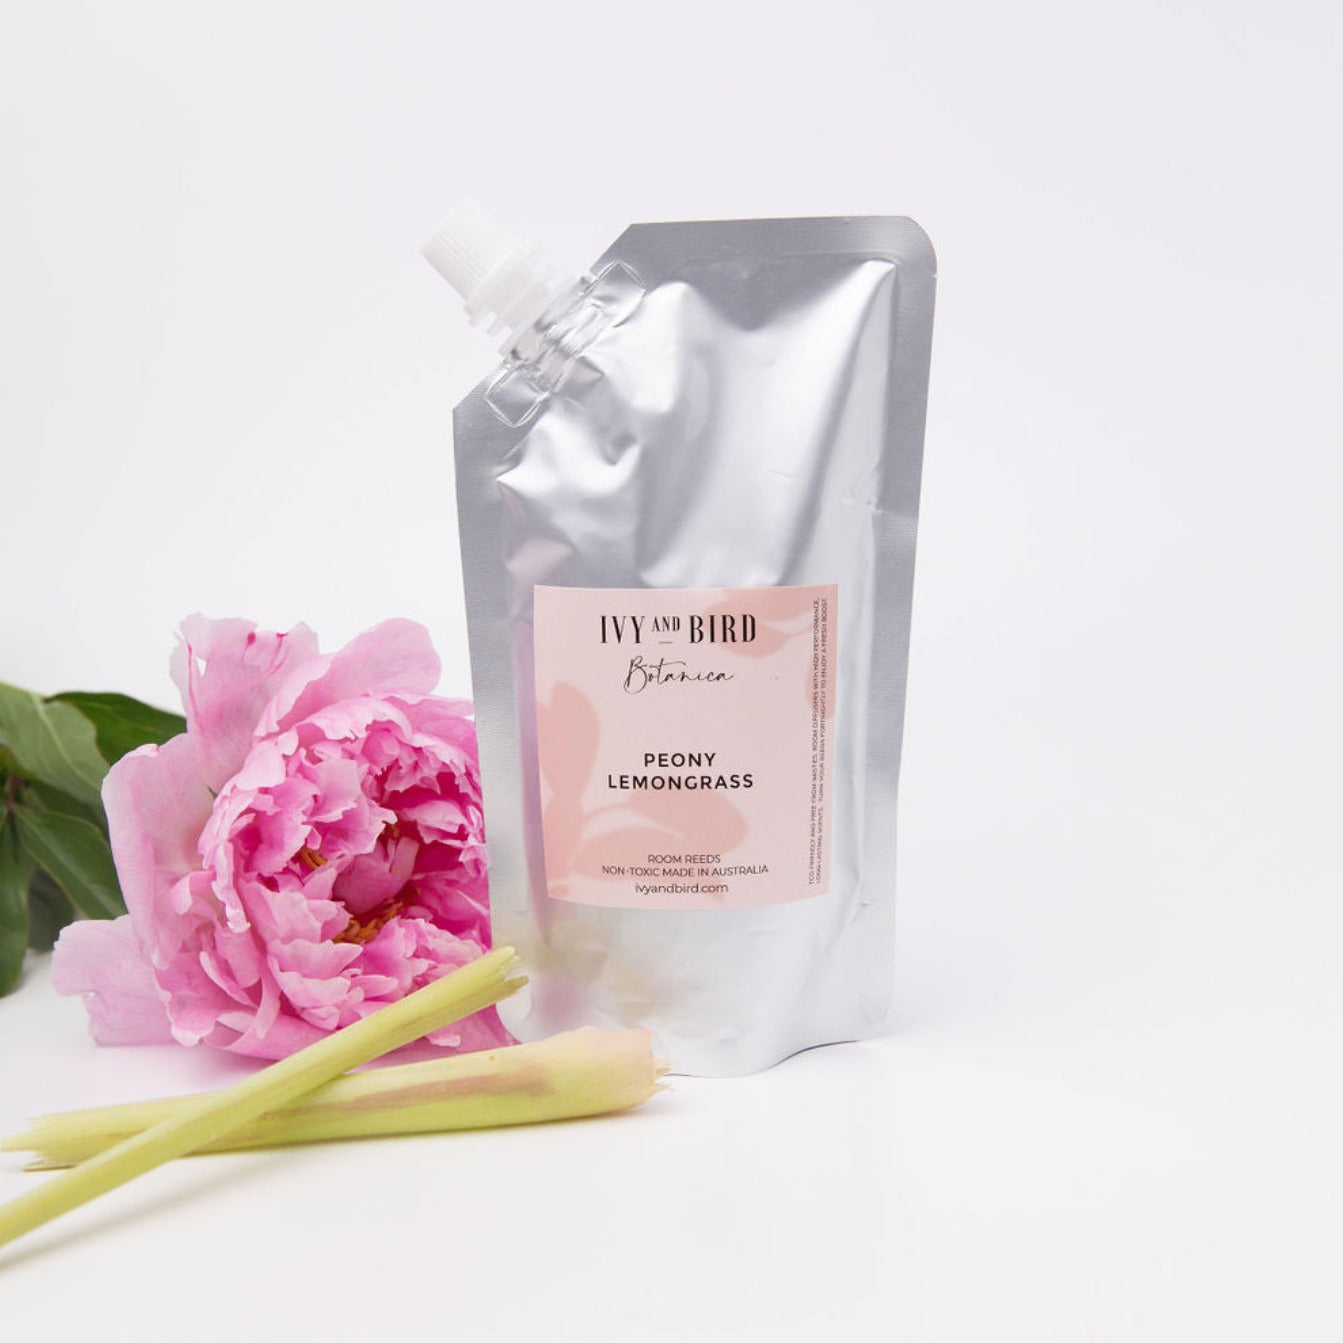 peony and lemongrass room diffuser refill pouch on white background with peony rose flower and lemongrass plant